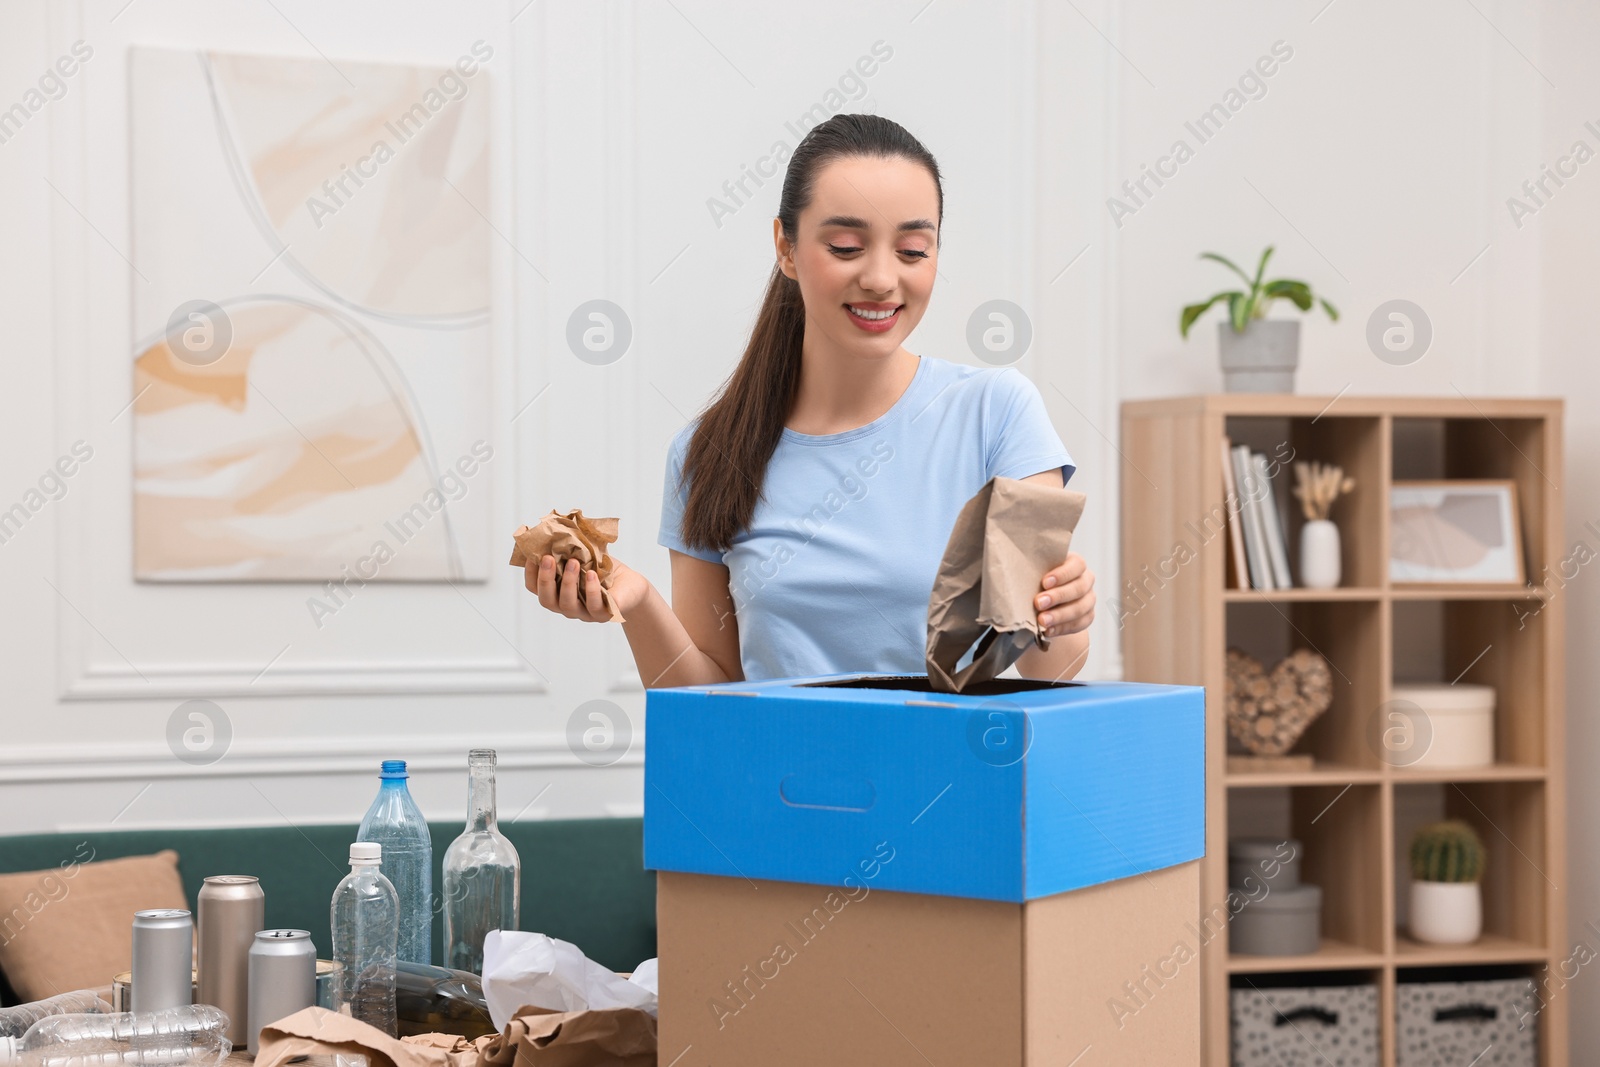 Photo of Garbage sorting. Smiling woman throwing crumpled paper into cardboard box in room